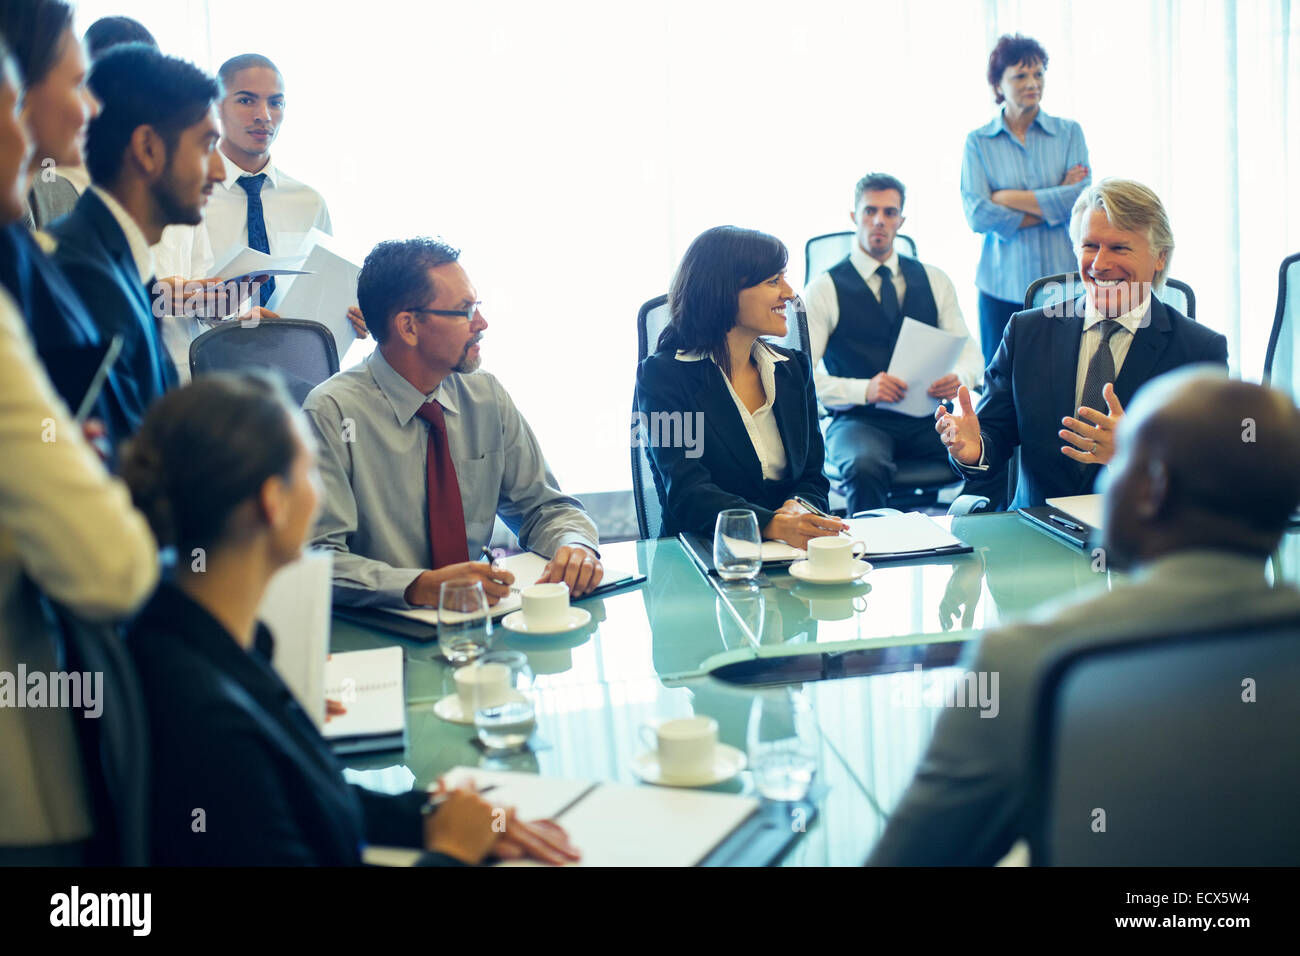 Large group of business people having meeting in conference room Stock Photo